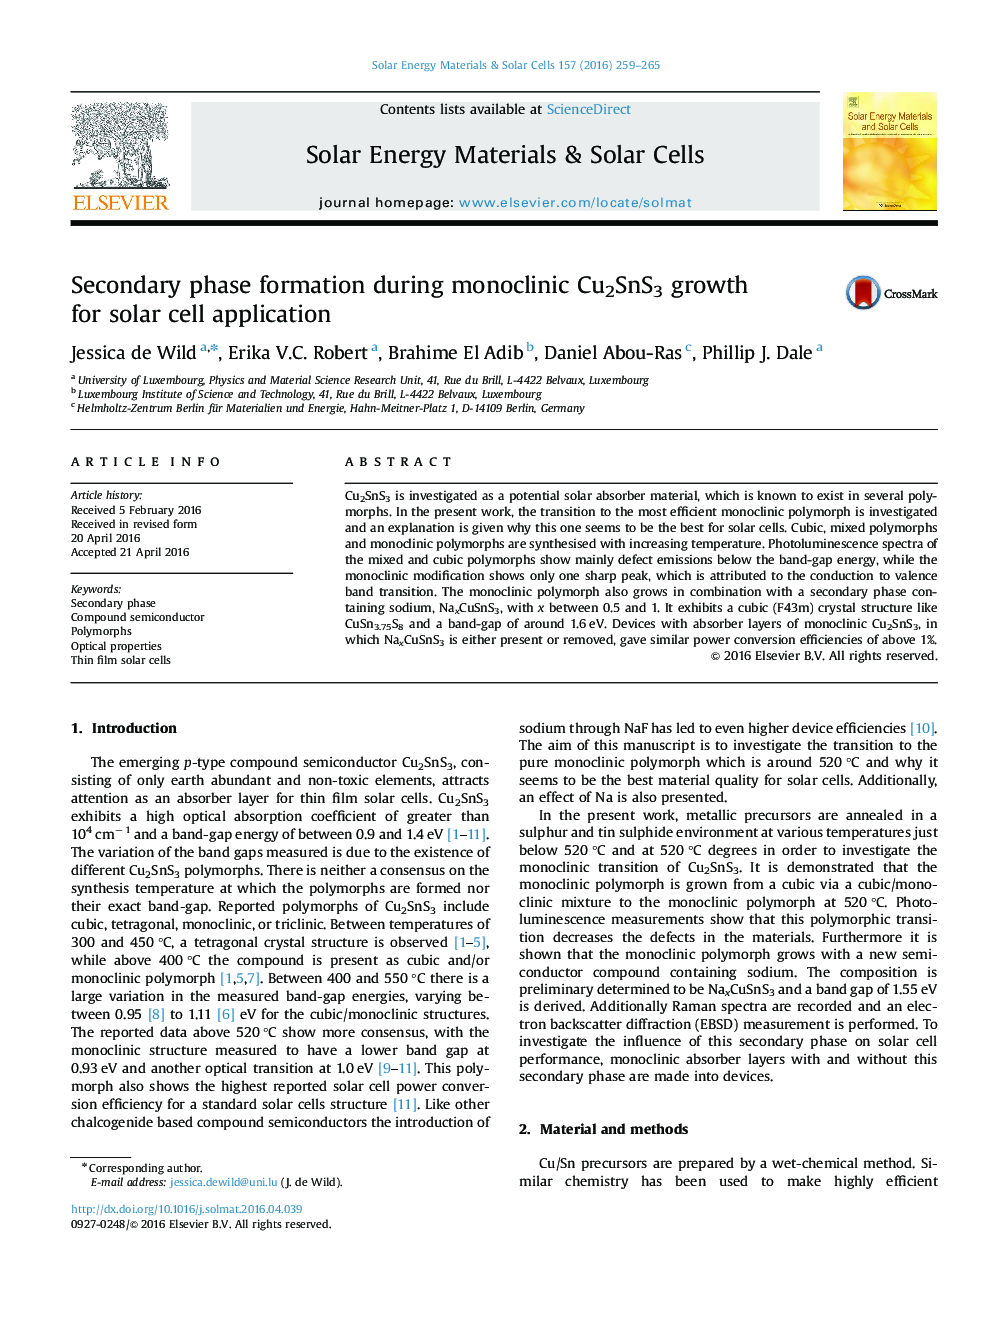 Secondary phase formation during monoclinic Cu2SnS3 growth for solar cell application